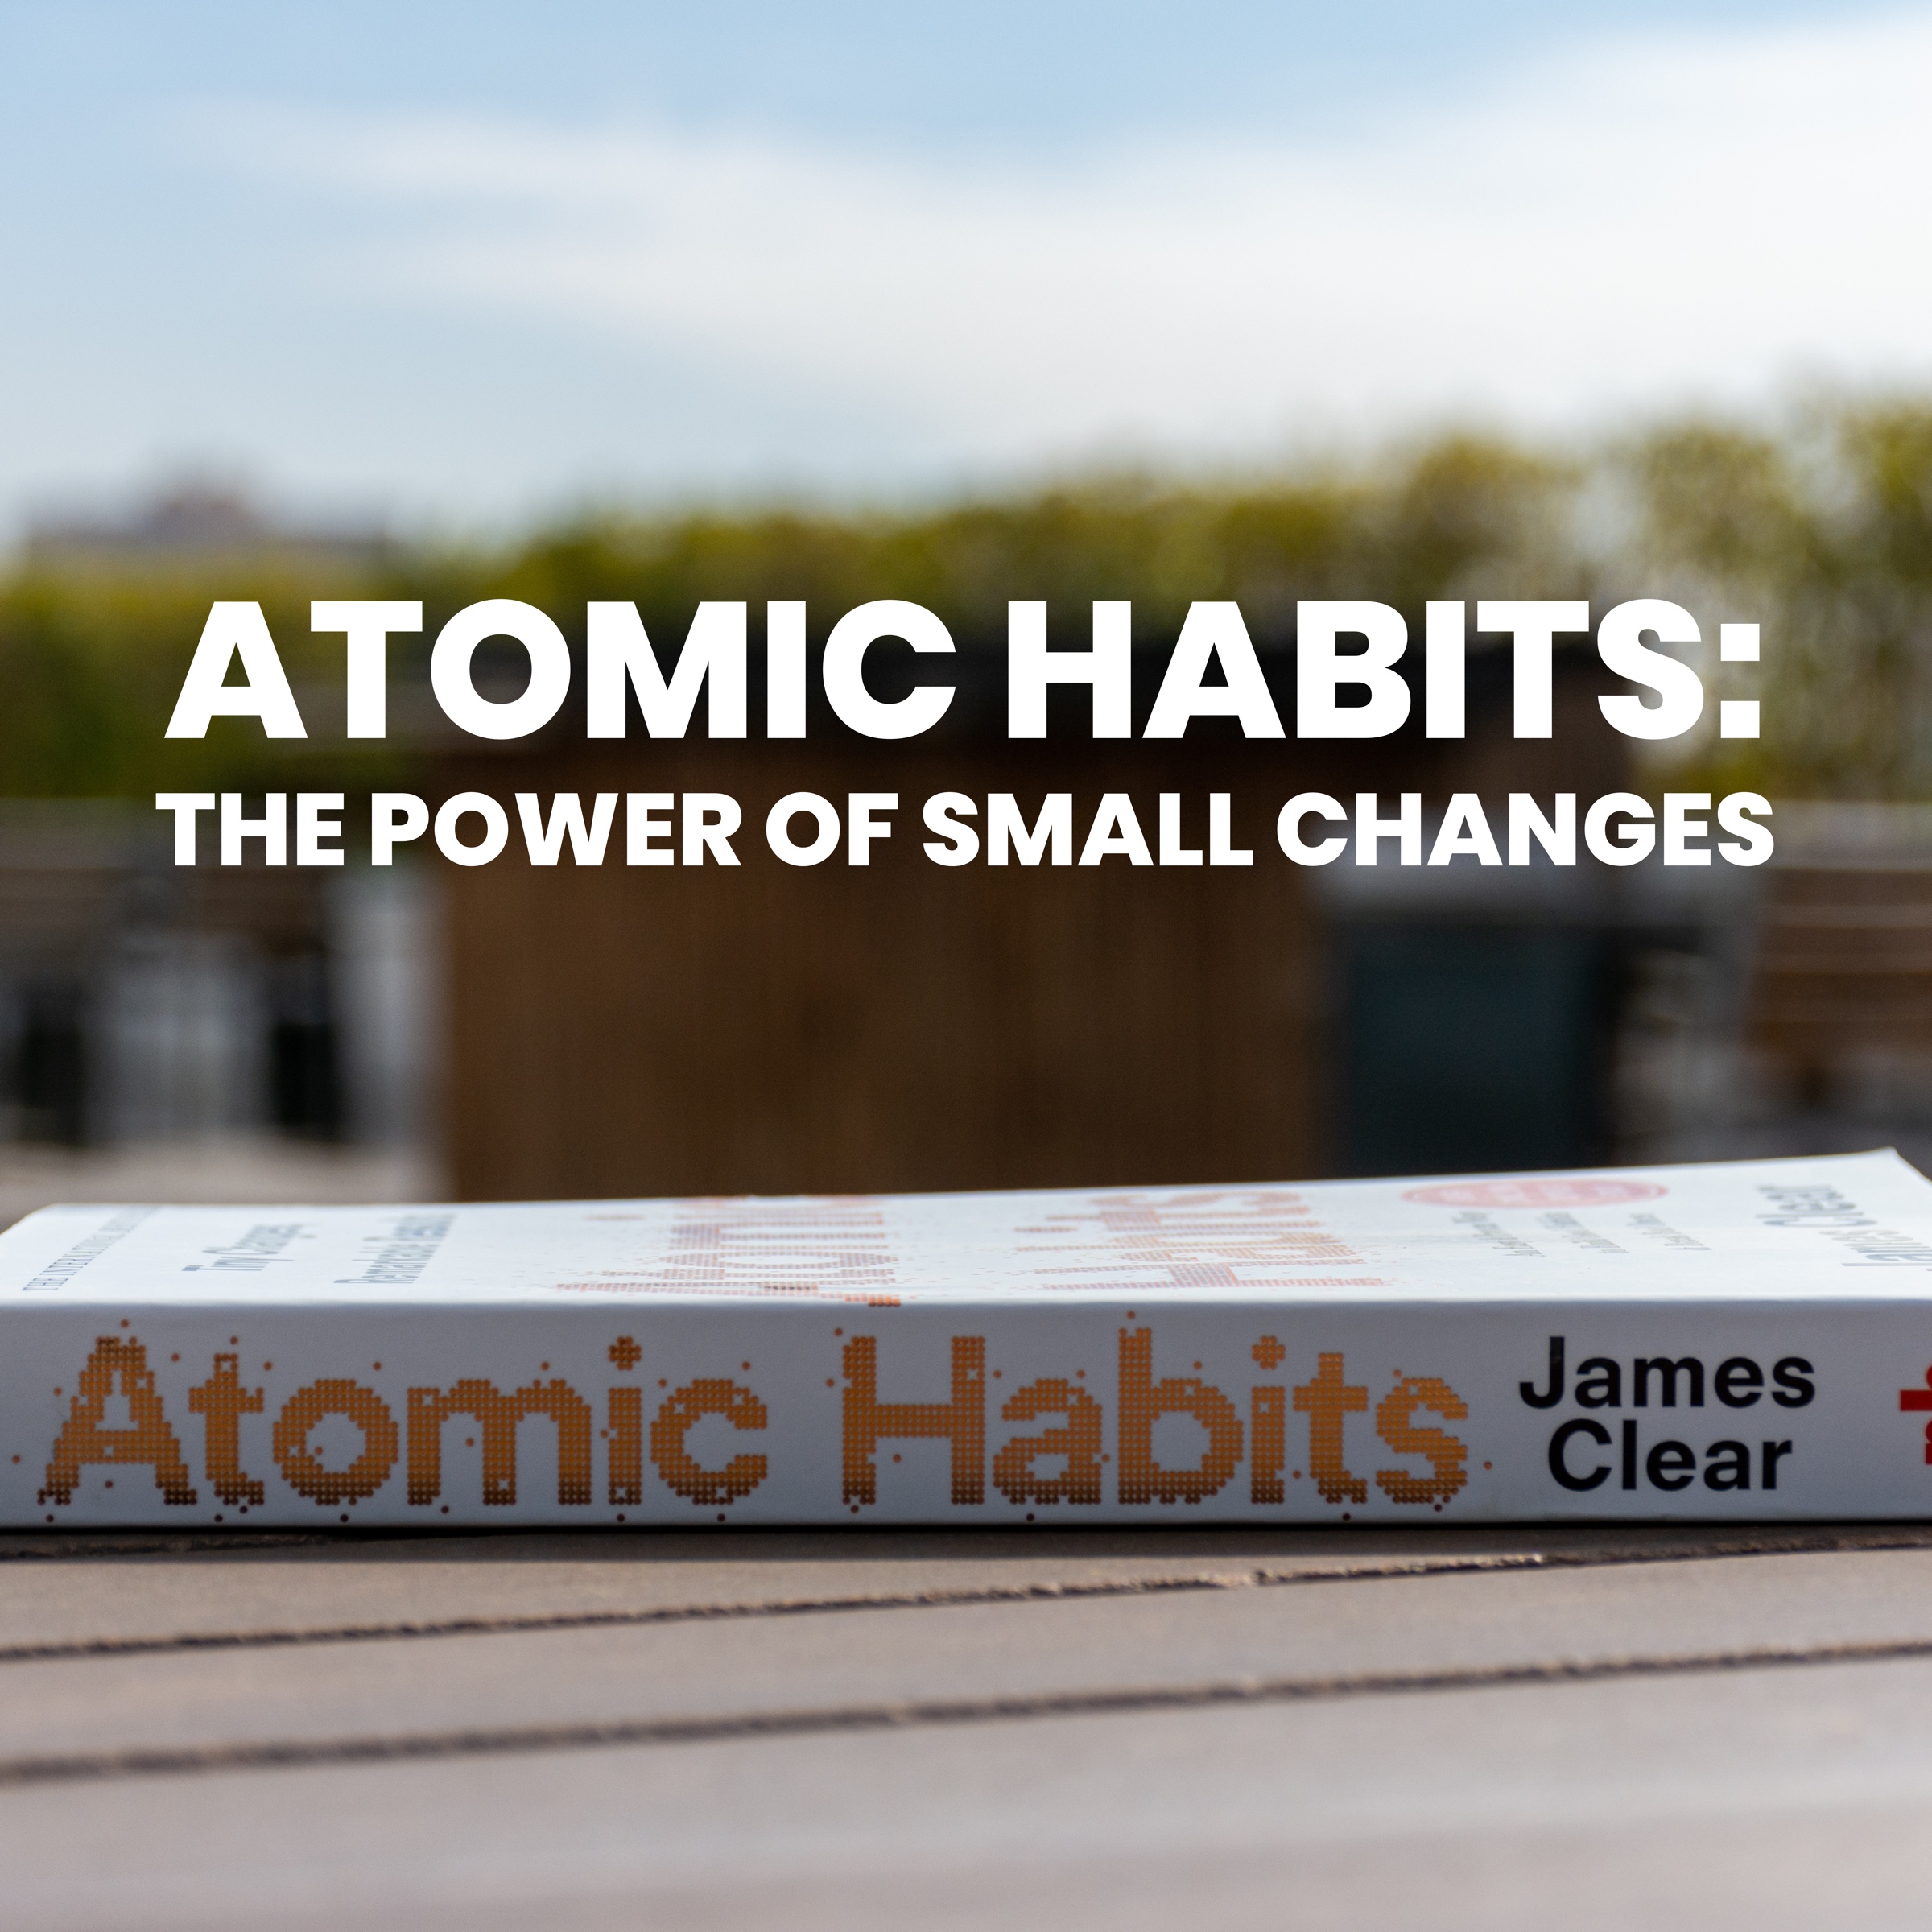 Atomic Habits: The Power of Small Changes